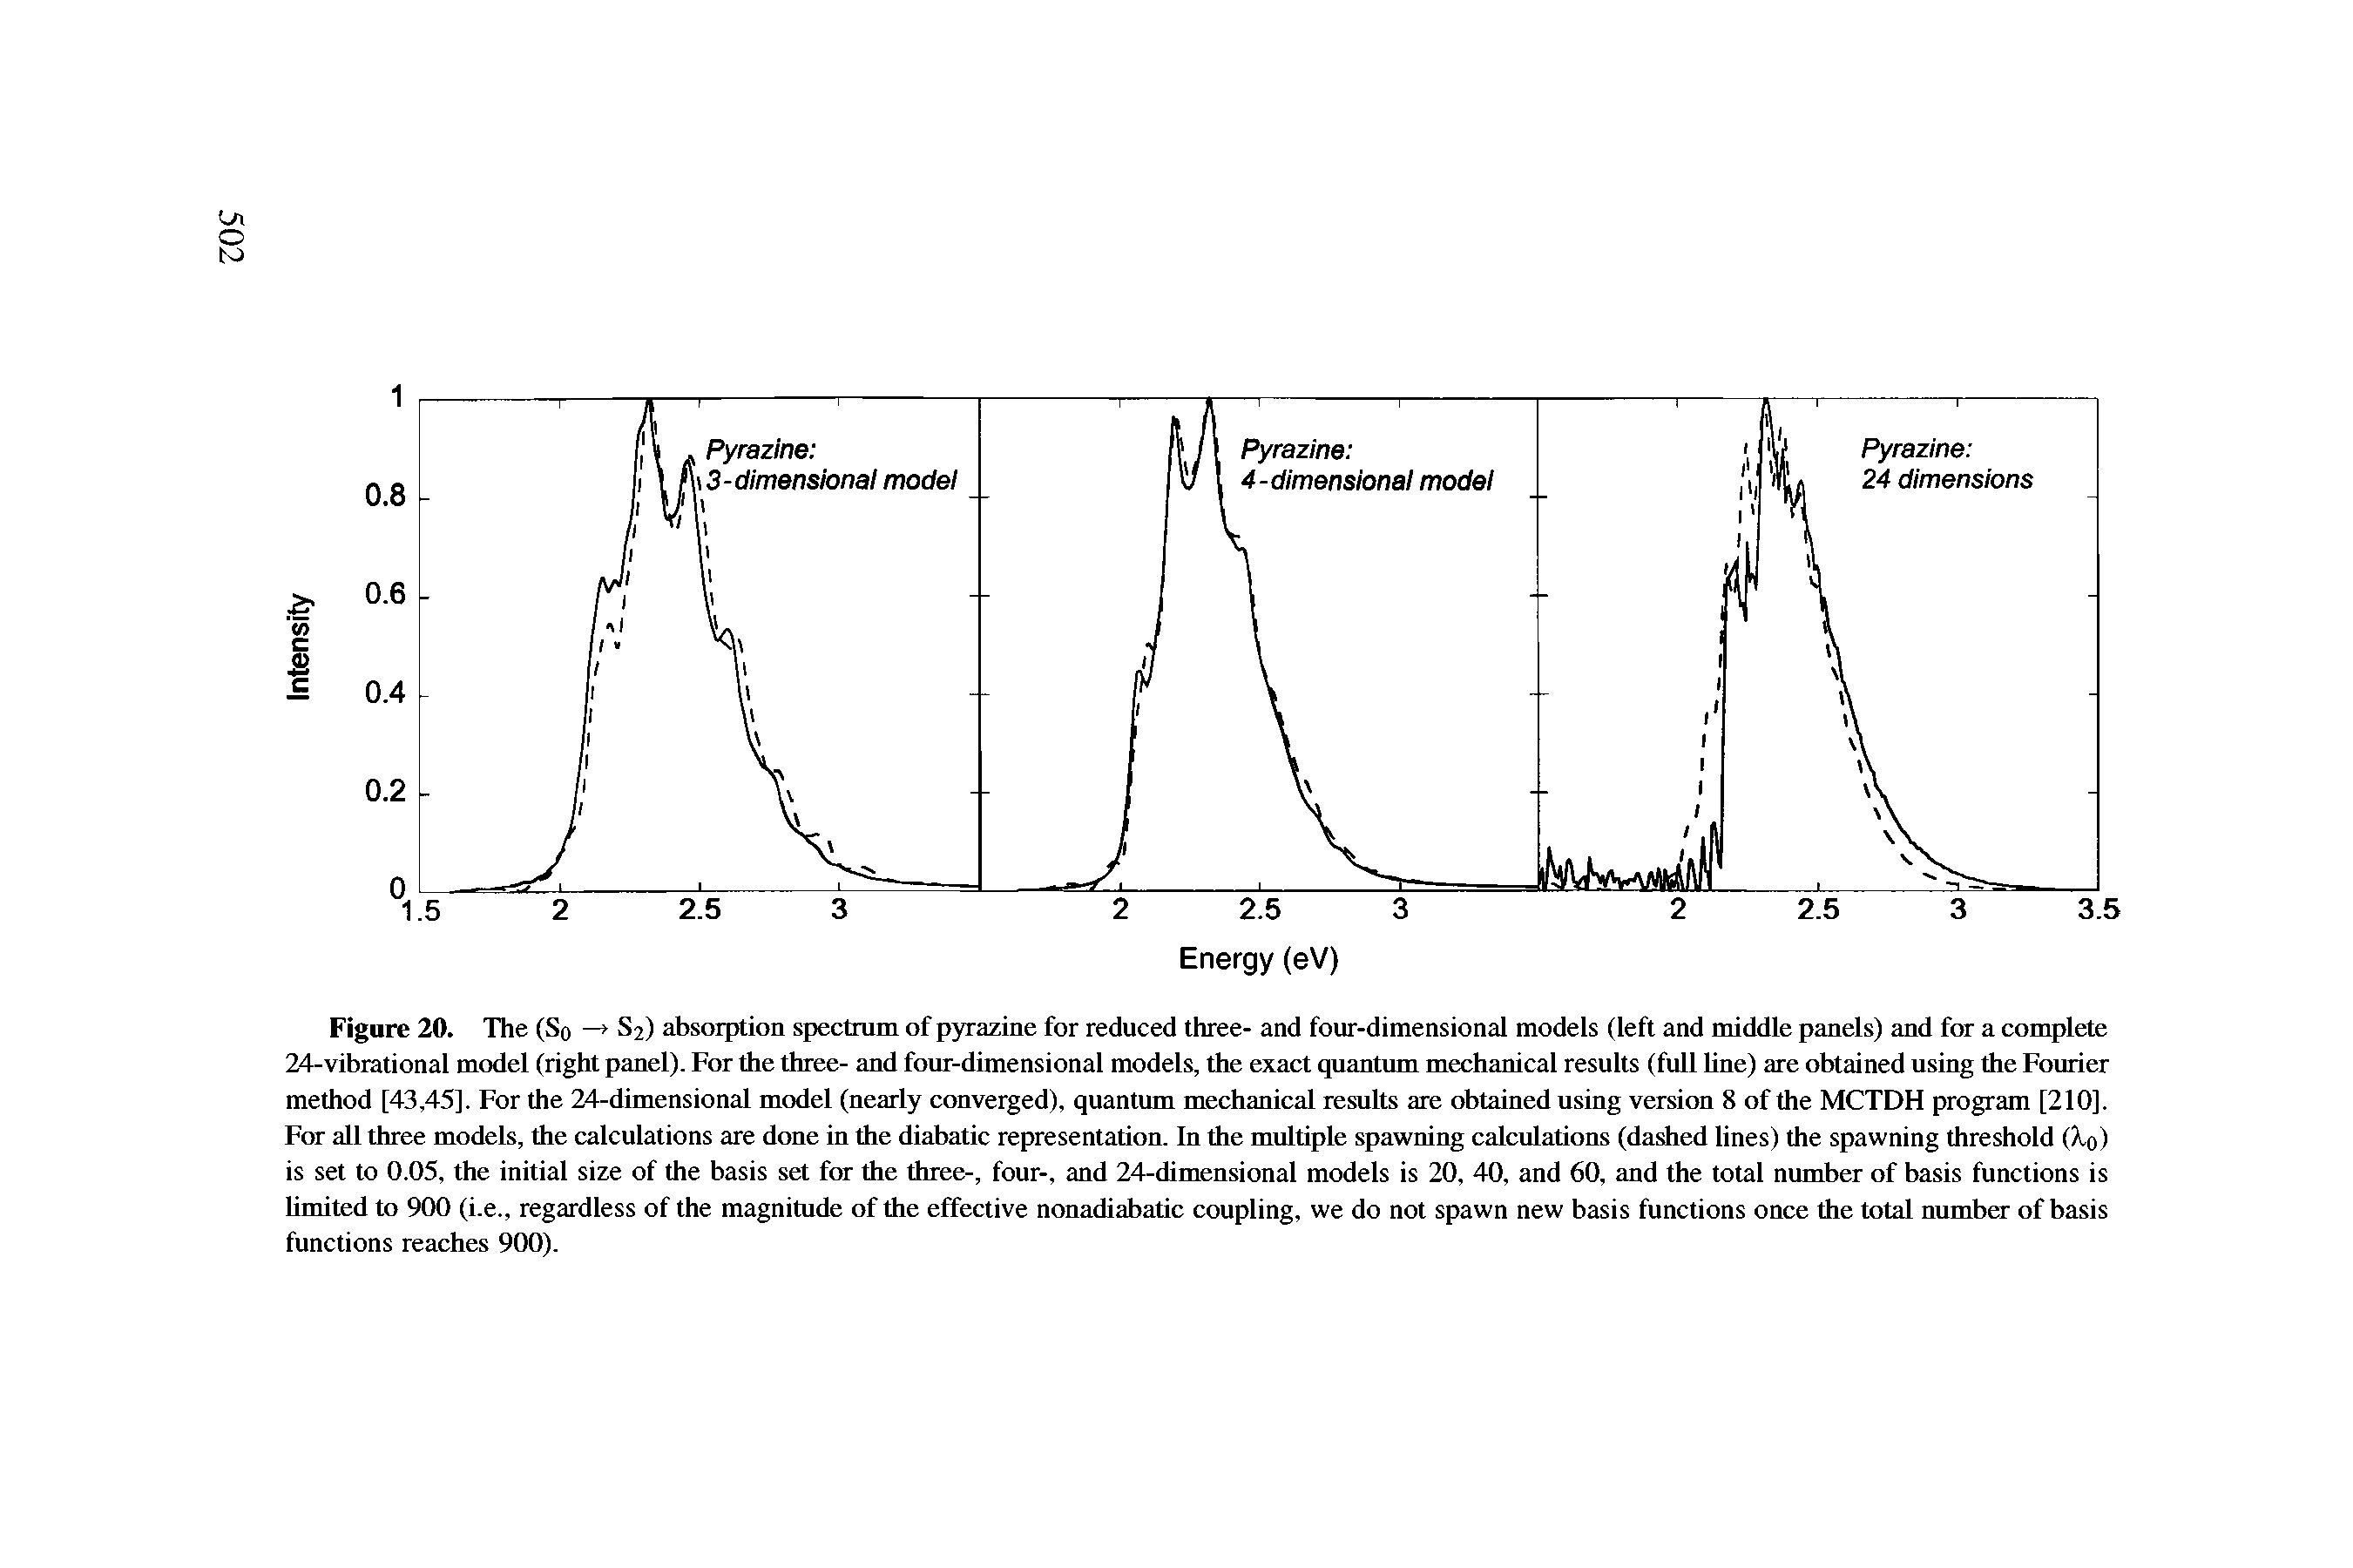 Figure 20. The (So —> S2) absorption spectrum of pyrazine for reduced three- and four-dimensional models (left and middle panels) and for a complete 24-vibrational model (right panel). For the three- and four-dimensional models, the exact quantum mechanical results (full line) are obtained using the Fourier method [43,45]. For the 24-dimensional model (nearly converged), quantum mechanical results are obtained using version 8 of the MCTDH program [210]. For all three models, the calculations are done in the diabatic representation. In the multiple spawning calculations (dashed lines) the spawning threshold 0,o) is set to 0.05, the initial size of the basis set for the three-, four-, and 24-dimensional models is 20, 40, and 60, and the total number of basis functions is limited to 900 (i.e., regardless of the magnitude of the effective nonadiabatic coupling, we do not spawn new basis functions once the total number of basis functions reaches 900).